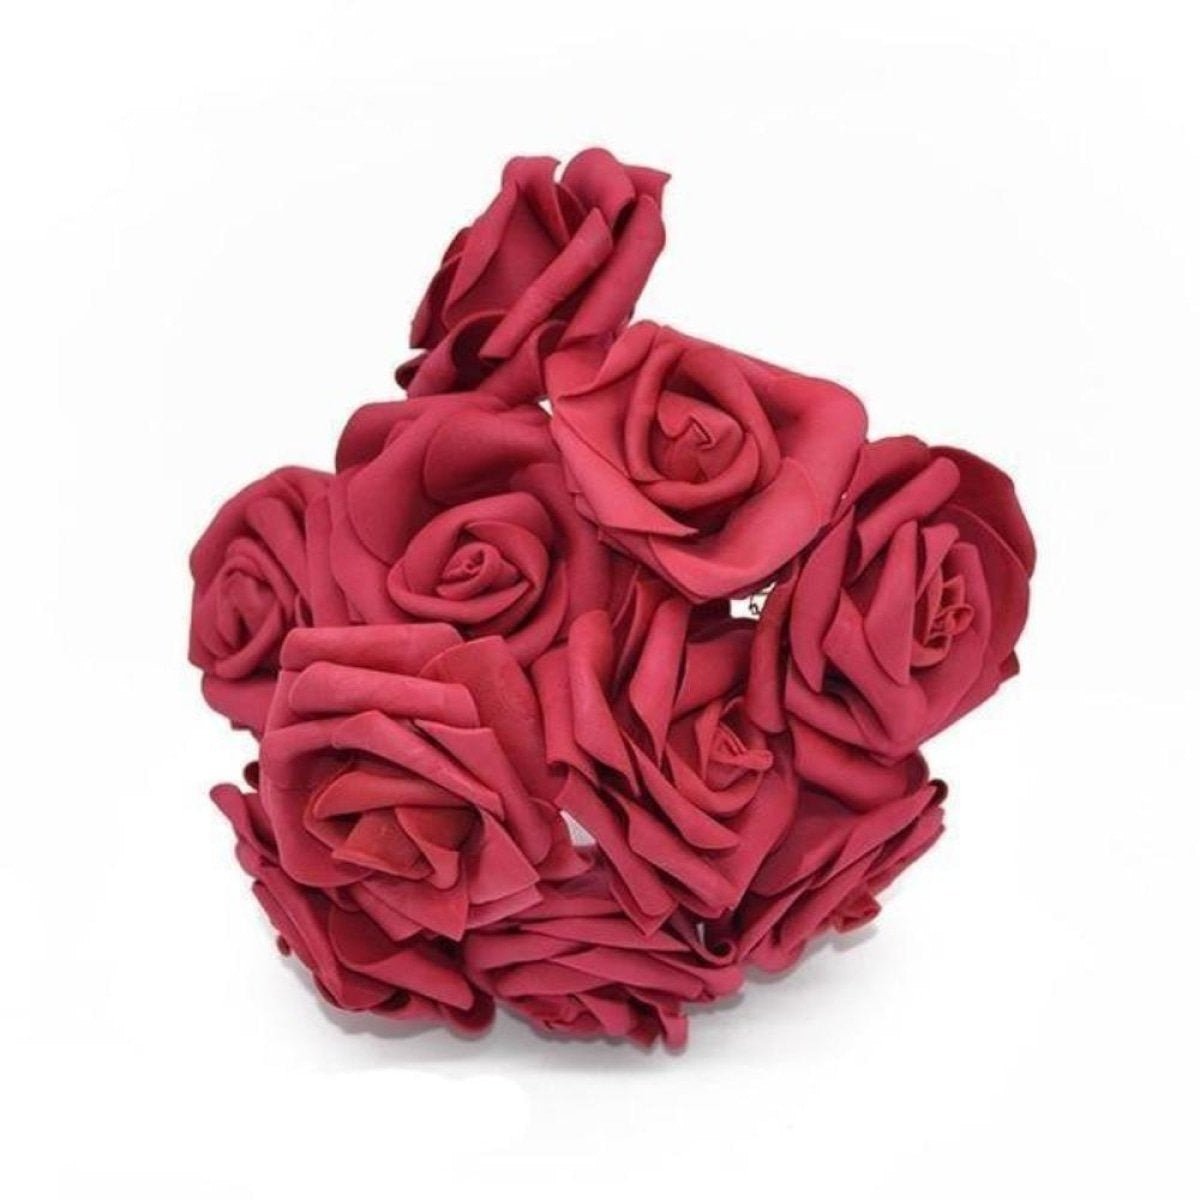 20pcs 7cm Artificial Flowers with Stems Foam Rose Fake Bride Bouquet Wedding - Burgundy - - Asia Sell